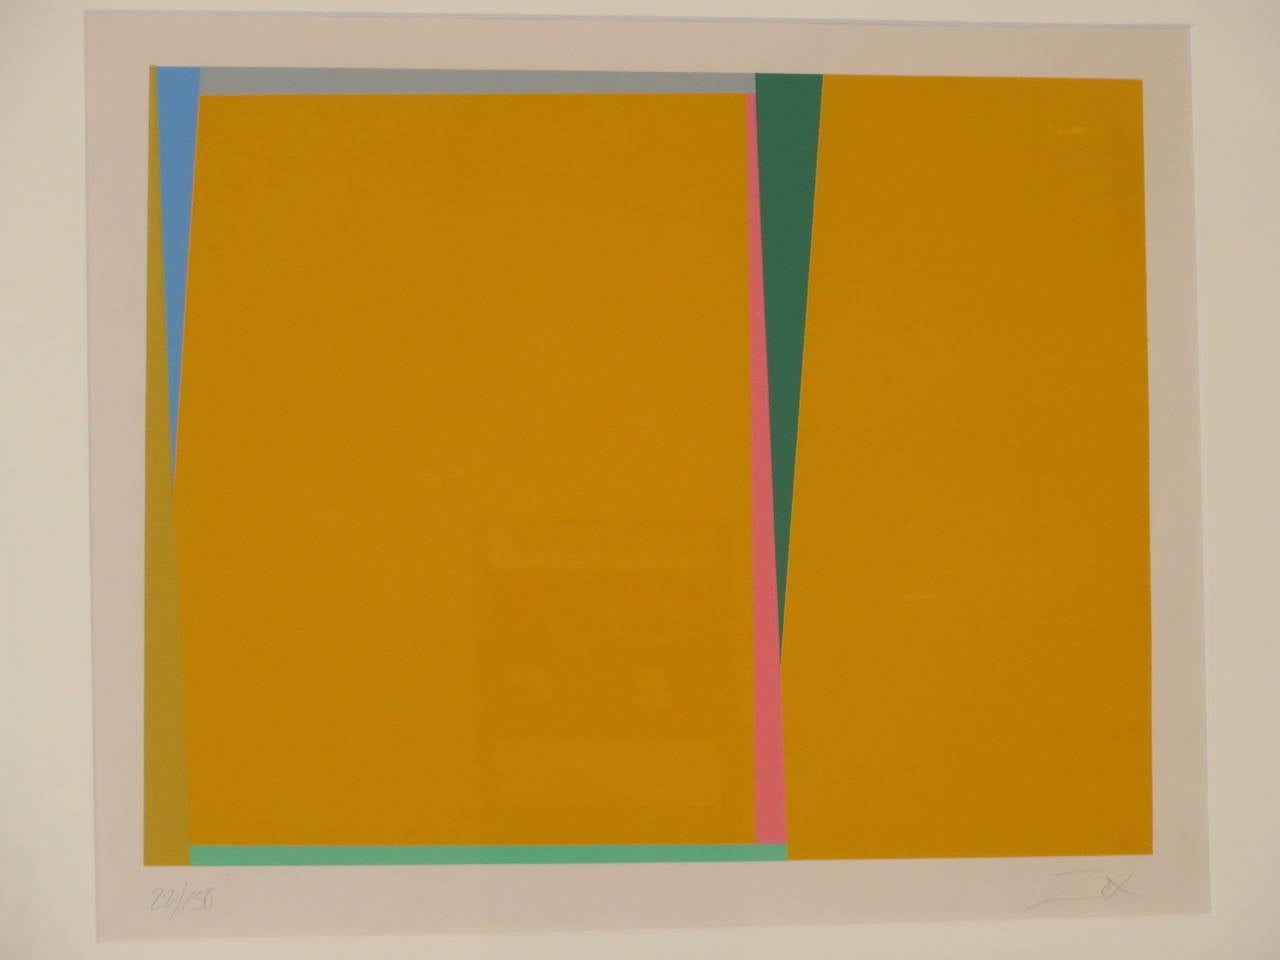 American Geometric Abstract Silkscreen by Larry Zox (1936 - 2006)